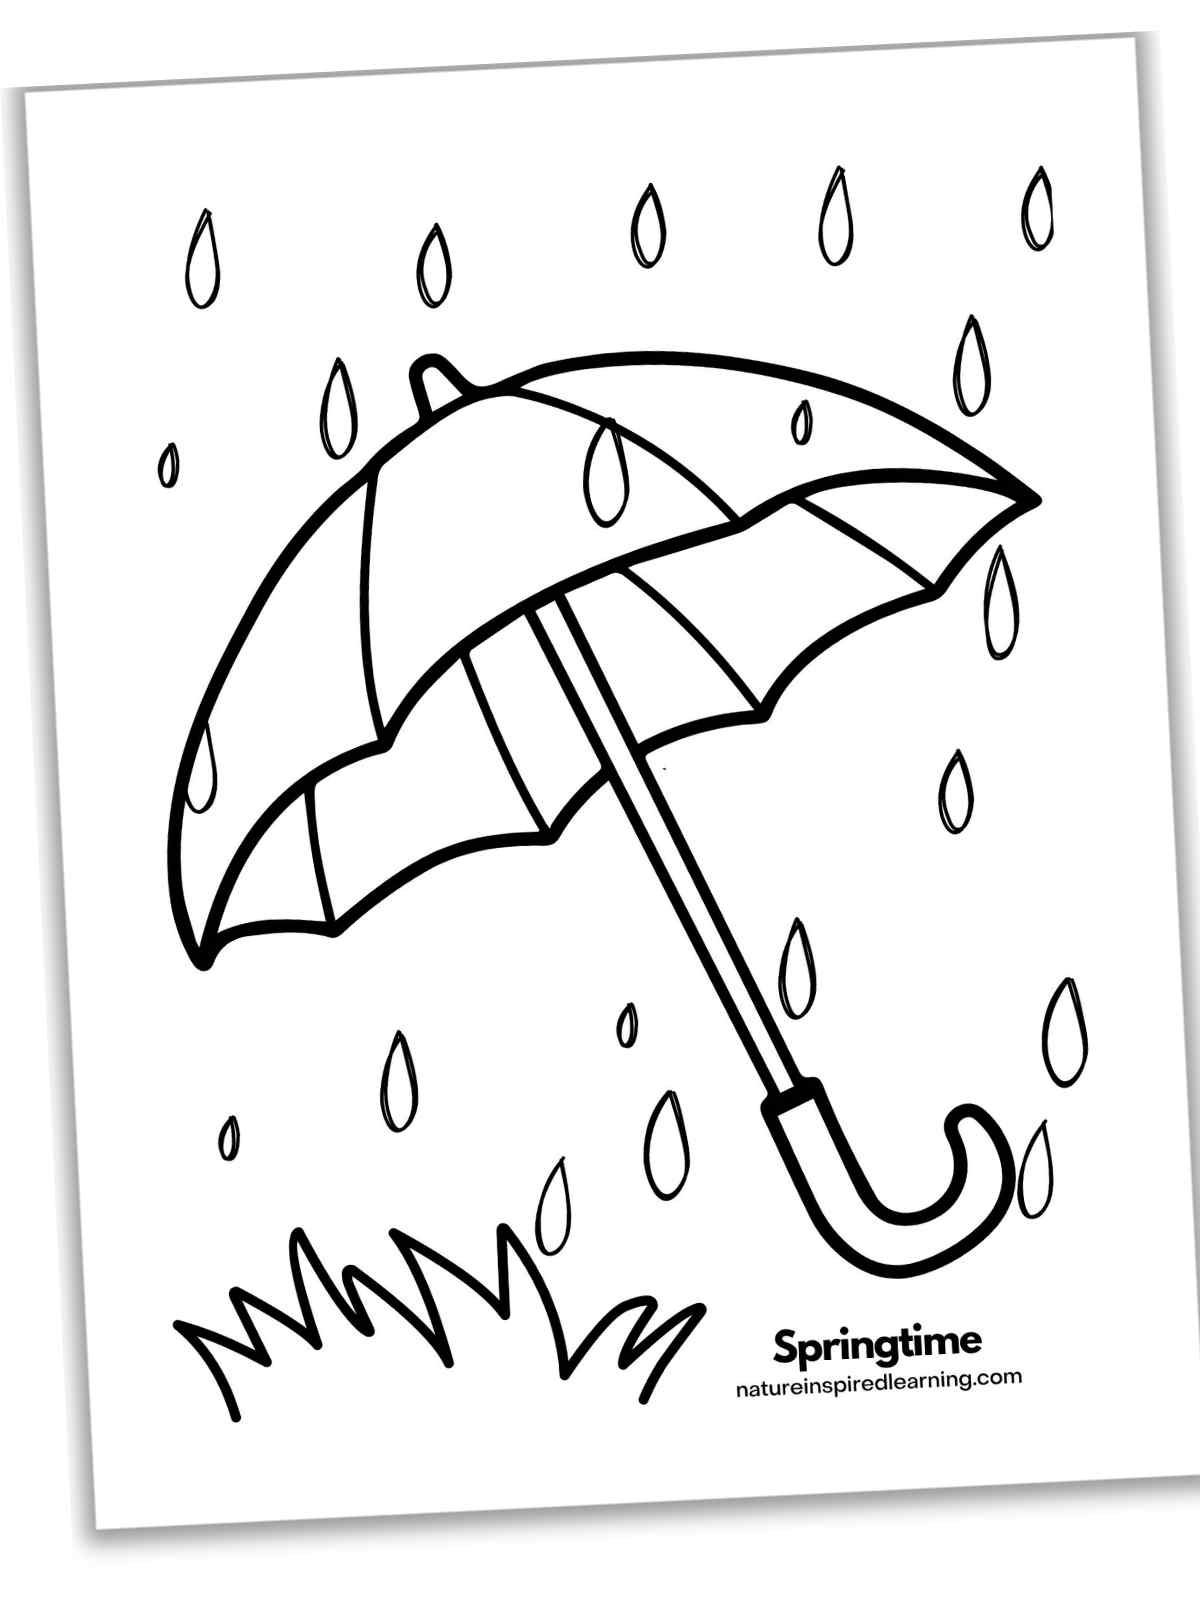 black and white printable with a large umbrella with raindrops with grass